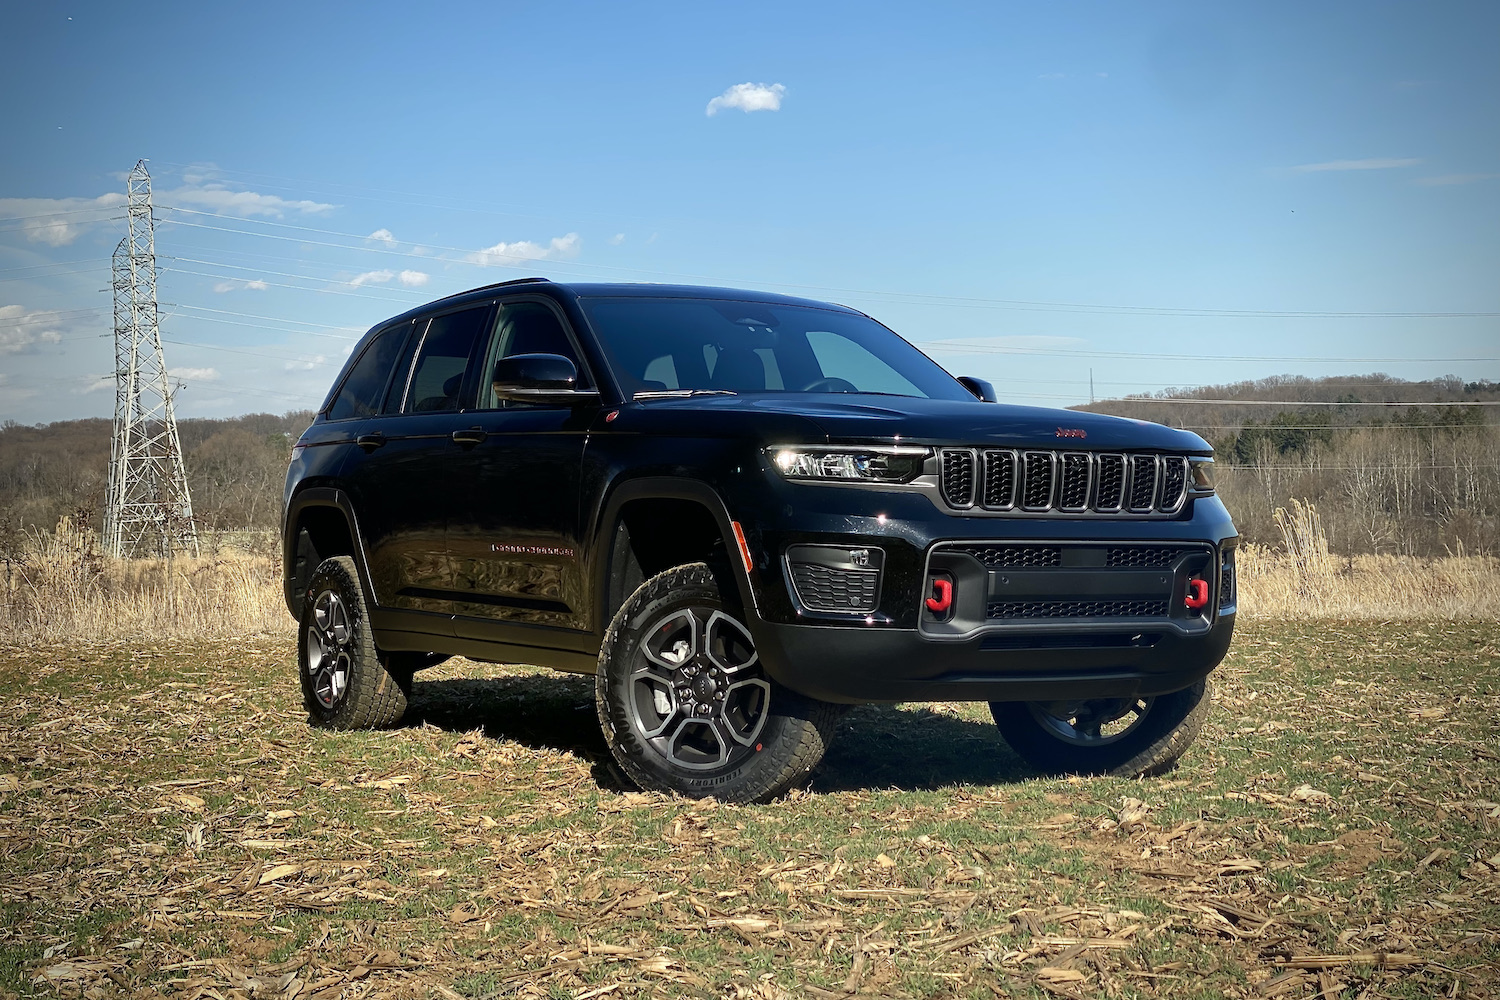 2022 Jeep Grand Cherokee Trailhawk front end from passenger's side with bushes in the back.